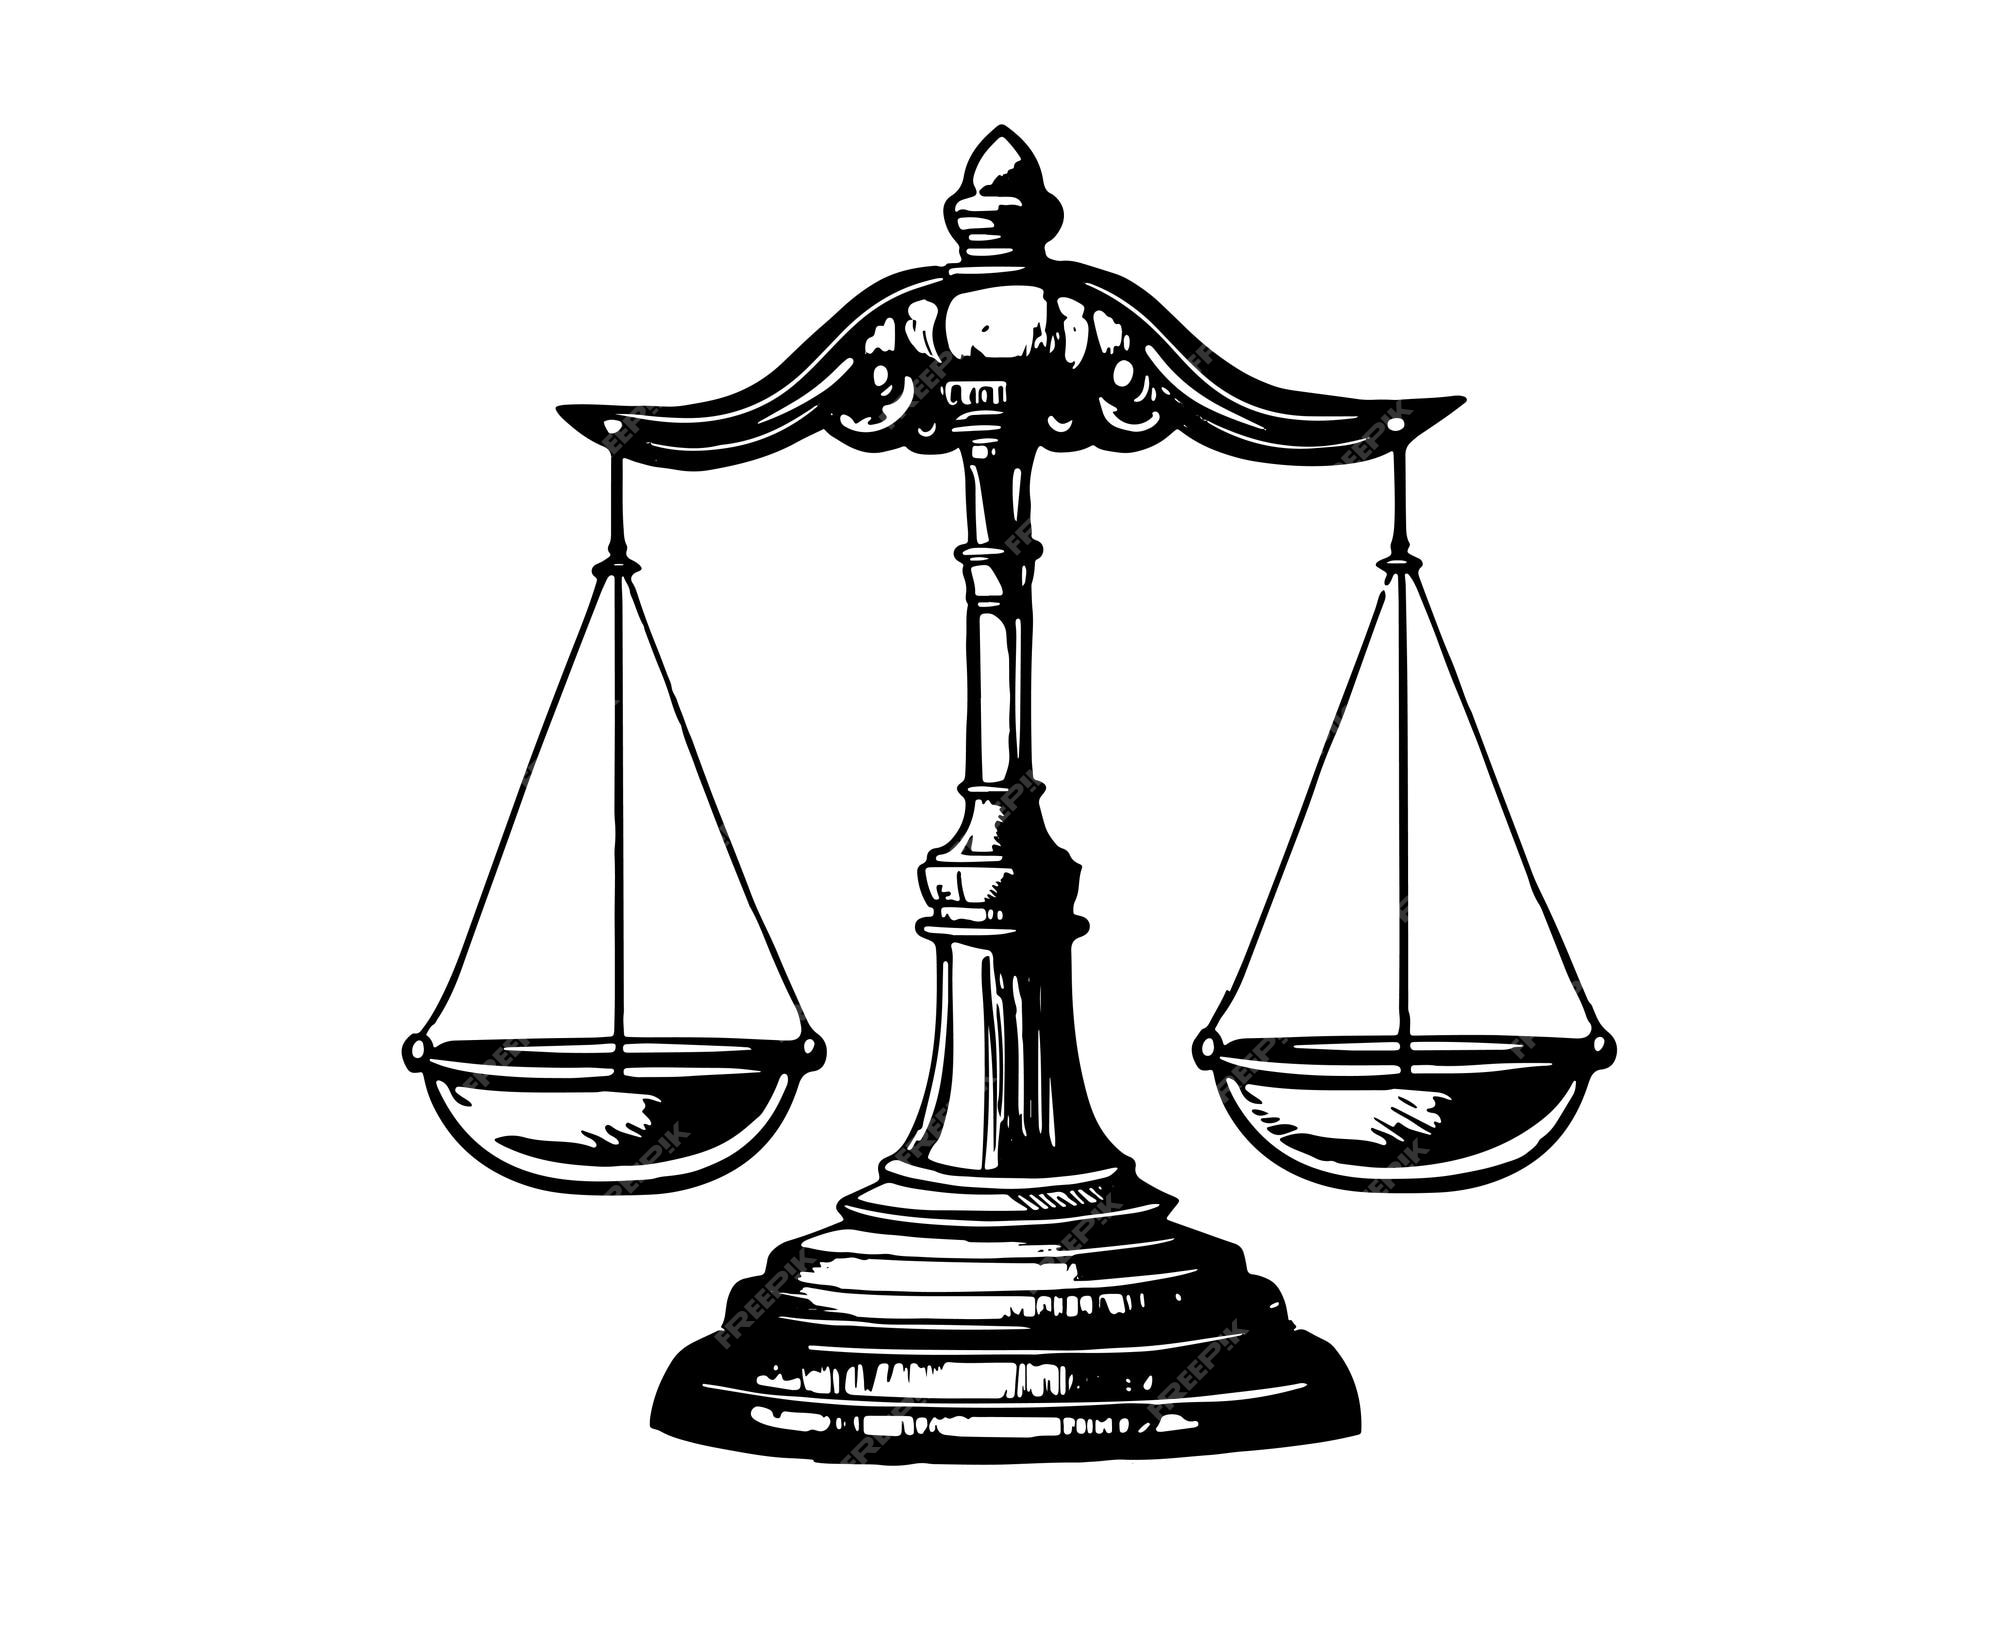 https://img.freepik.com/premium-vector/scales-weighing-libra-justice-hand-drawn-vector-hand-drawn-isolated-white-background_511296-1681.jpg?w=2000